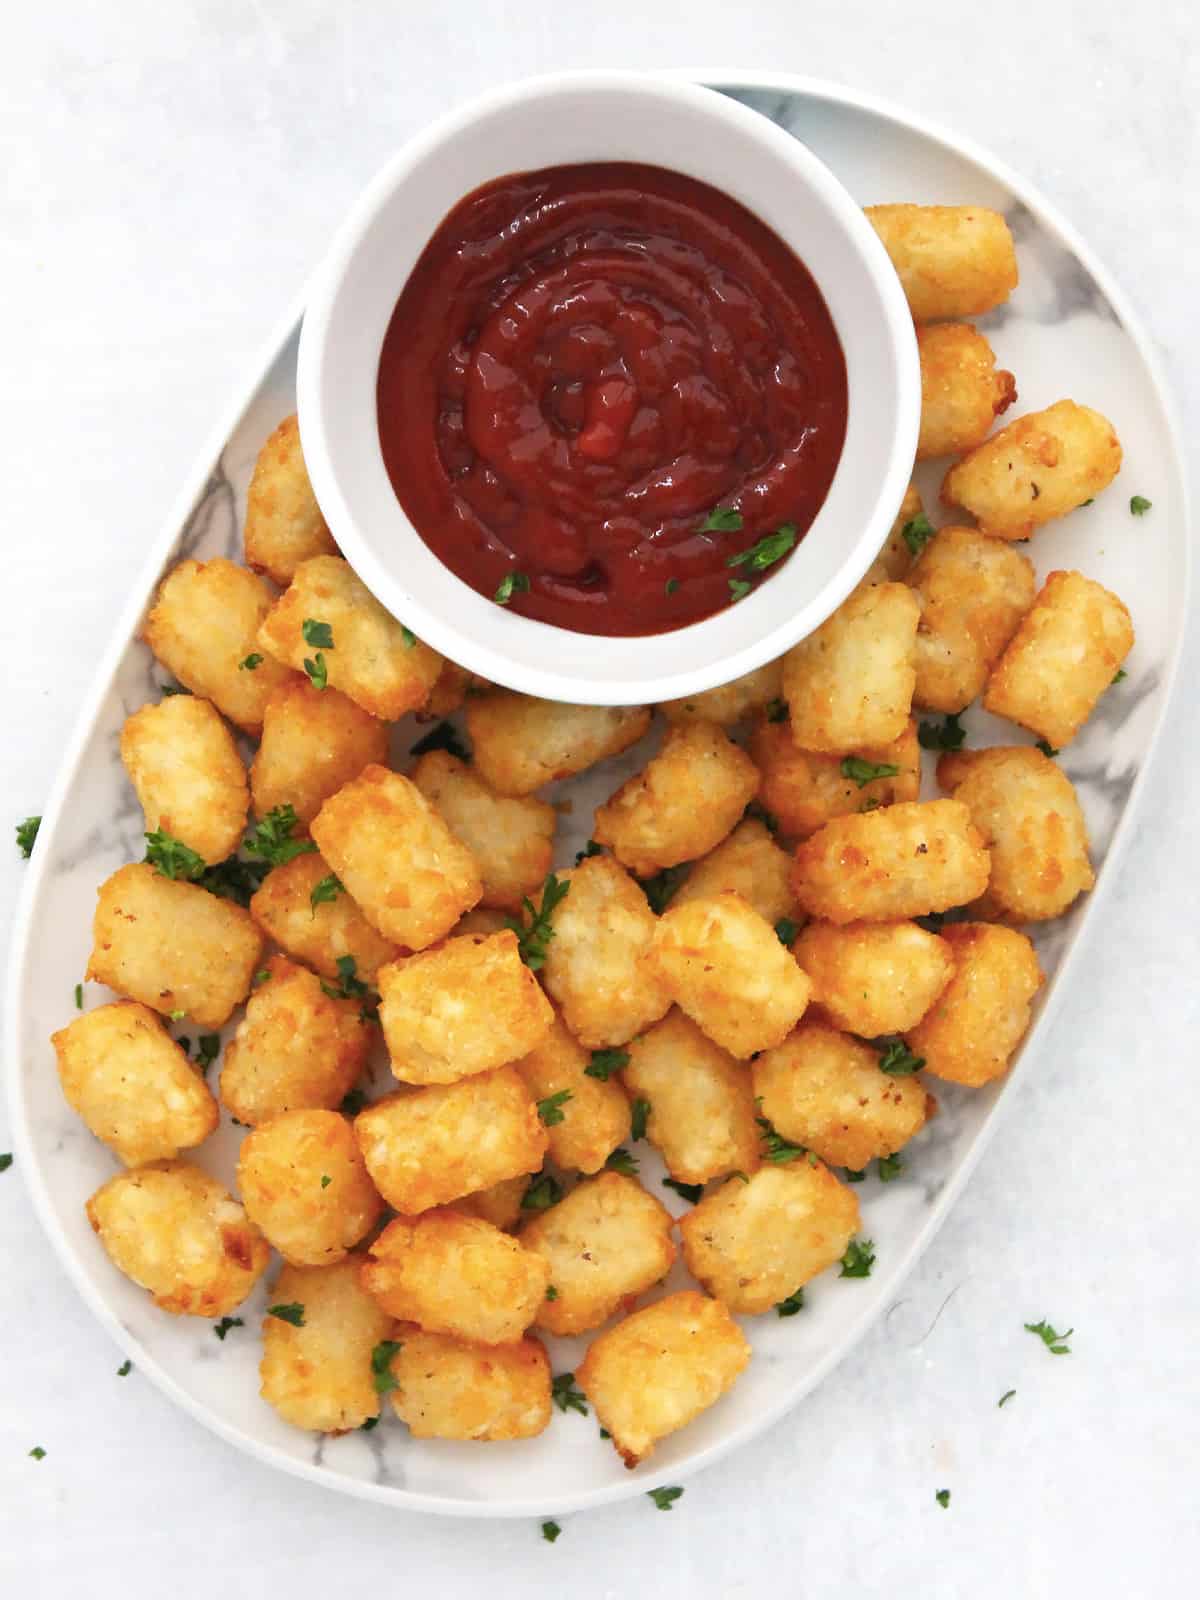 Overhead shot of air fryer tater tots on a white plate with a pot of tomato ketchup and garnished with fresh parsley.